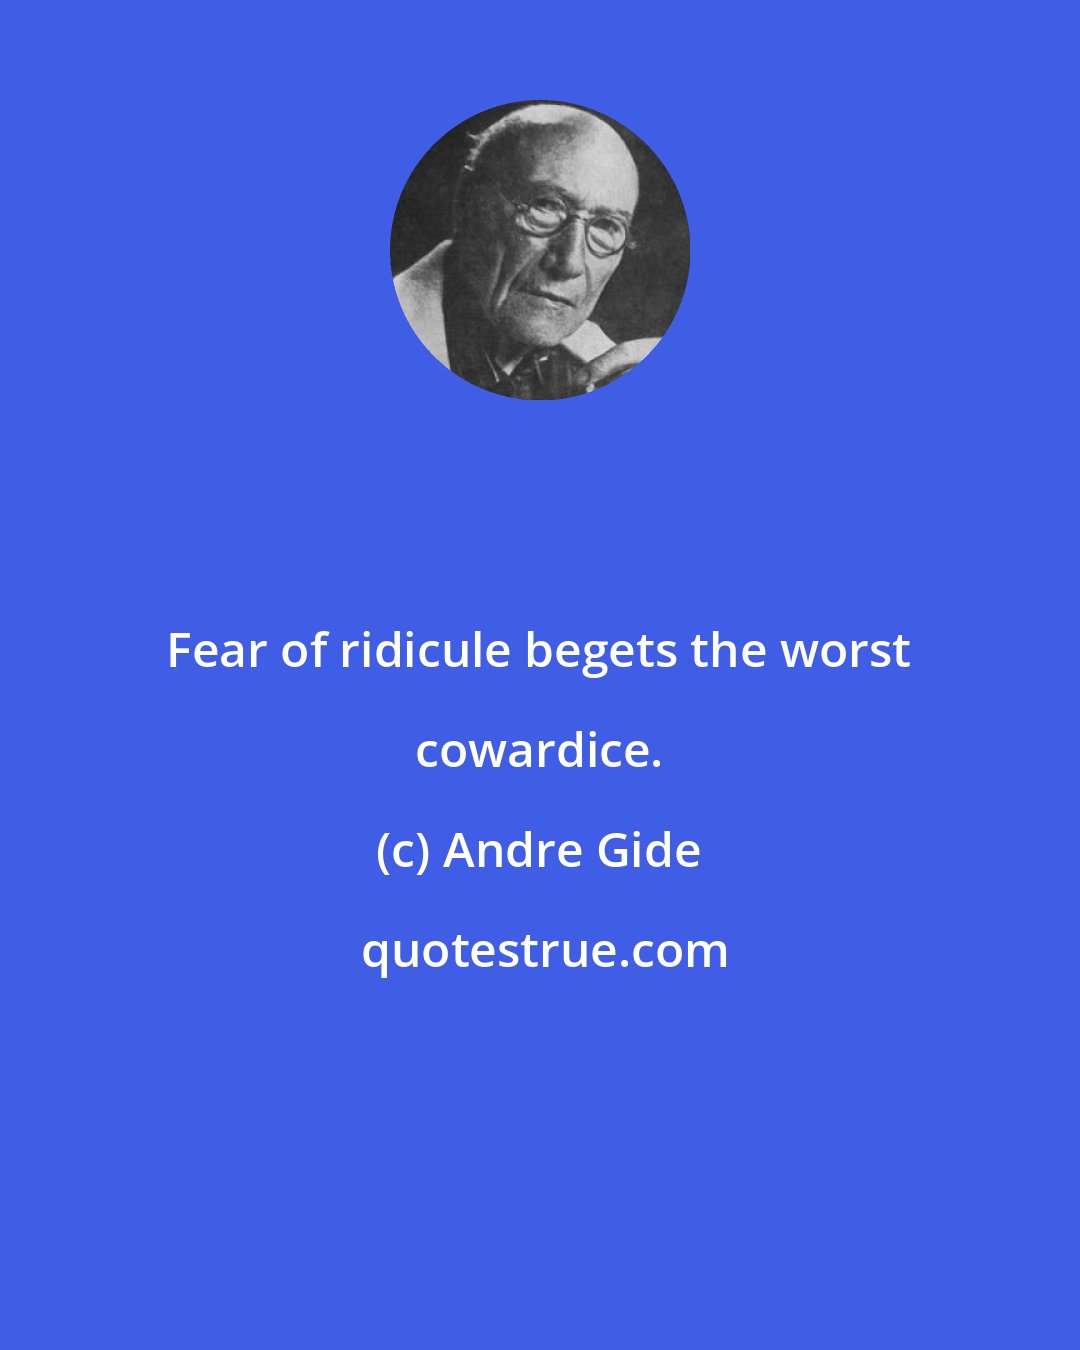 Andre Gide: Fear of ridicule begets the worst cowardice.